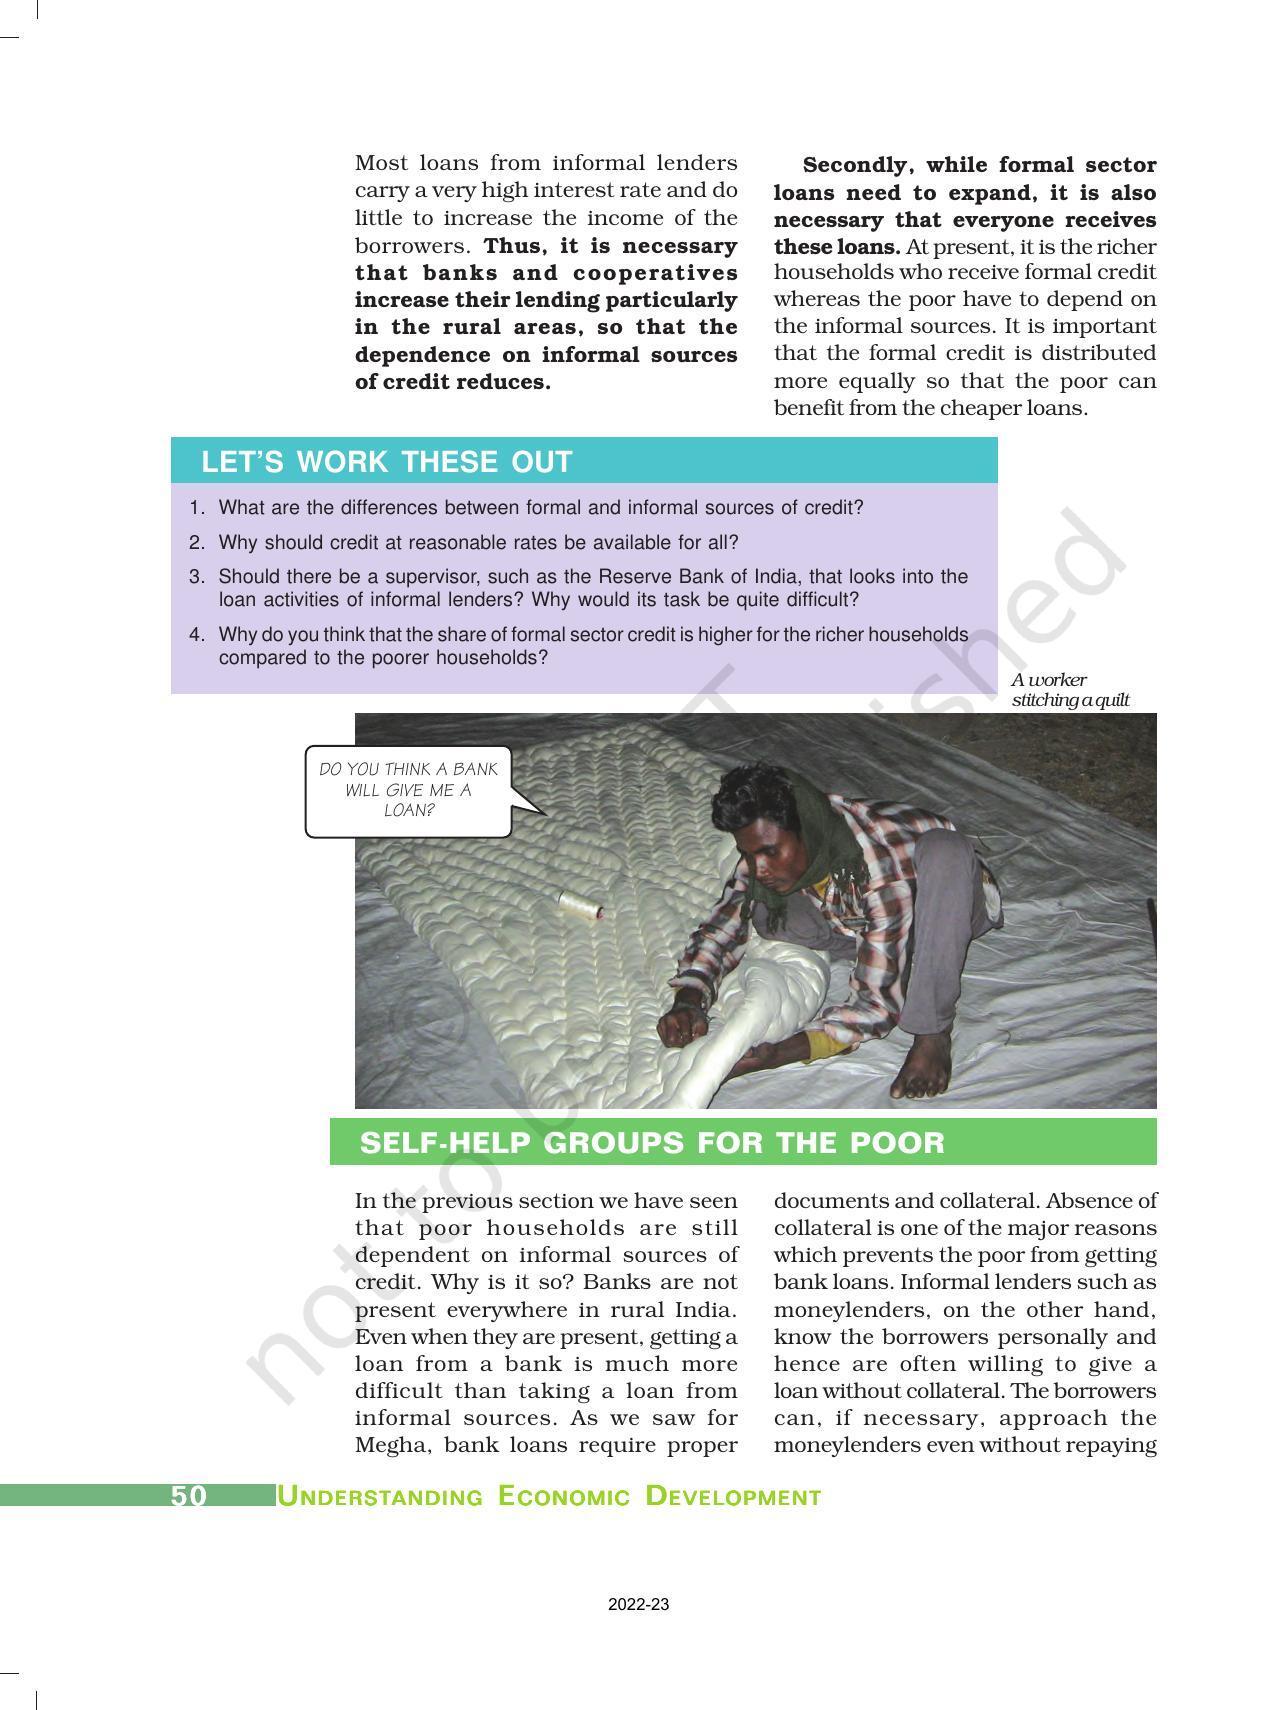 NCERT Book for Class 10 Economics Chapter 3 Money and Credit - Page 13